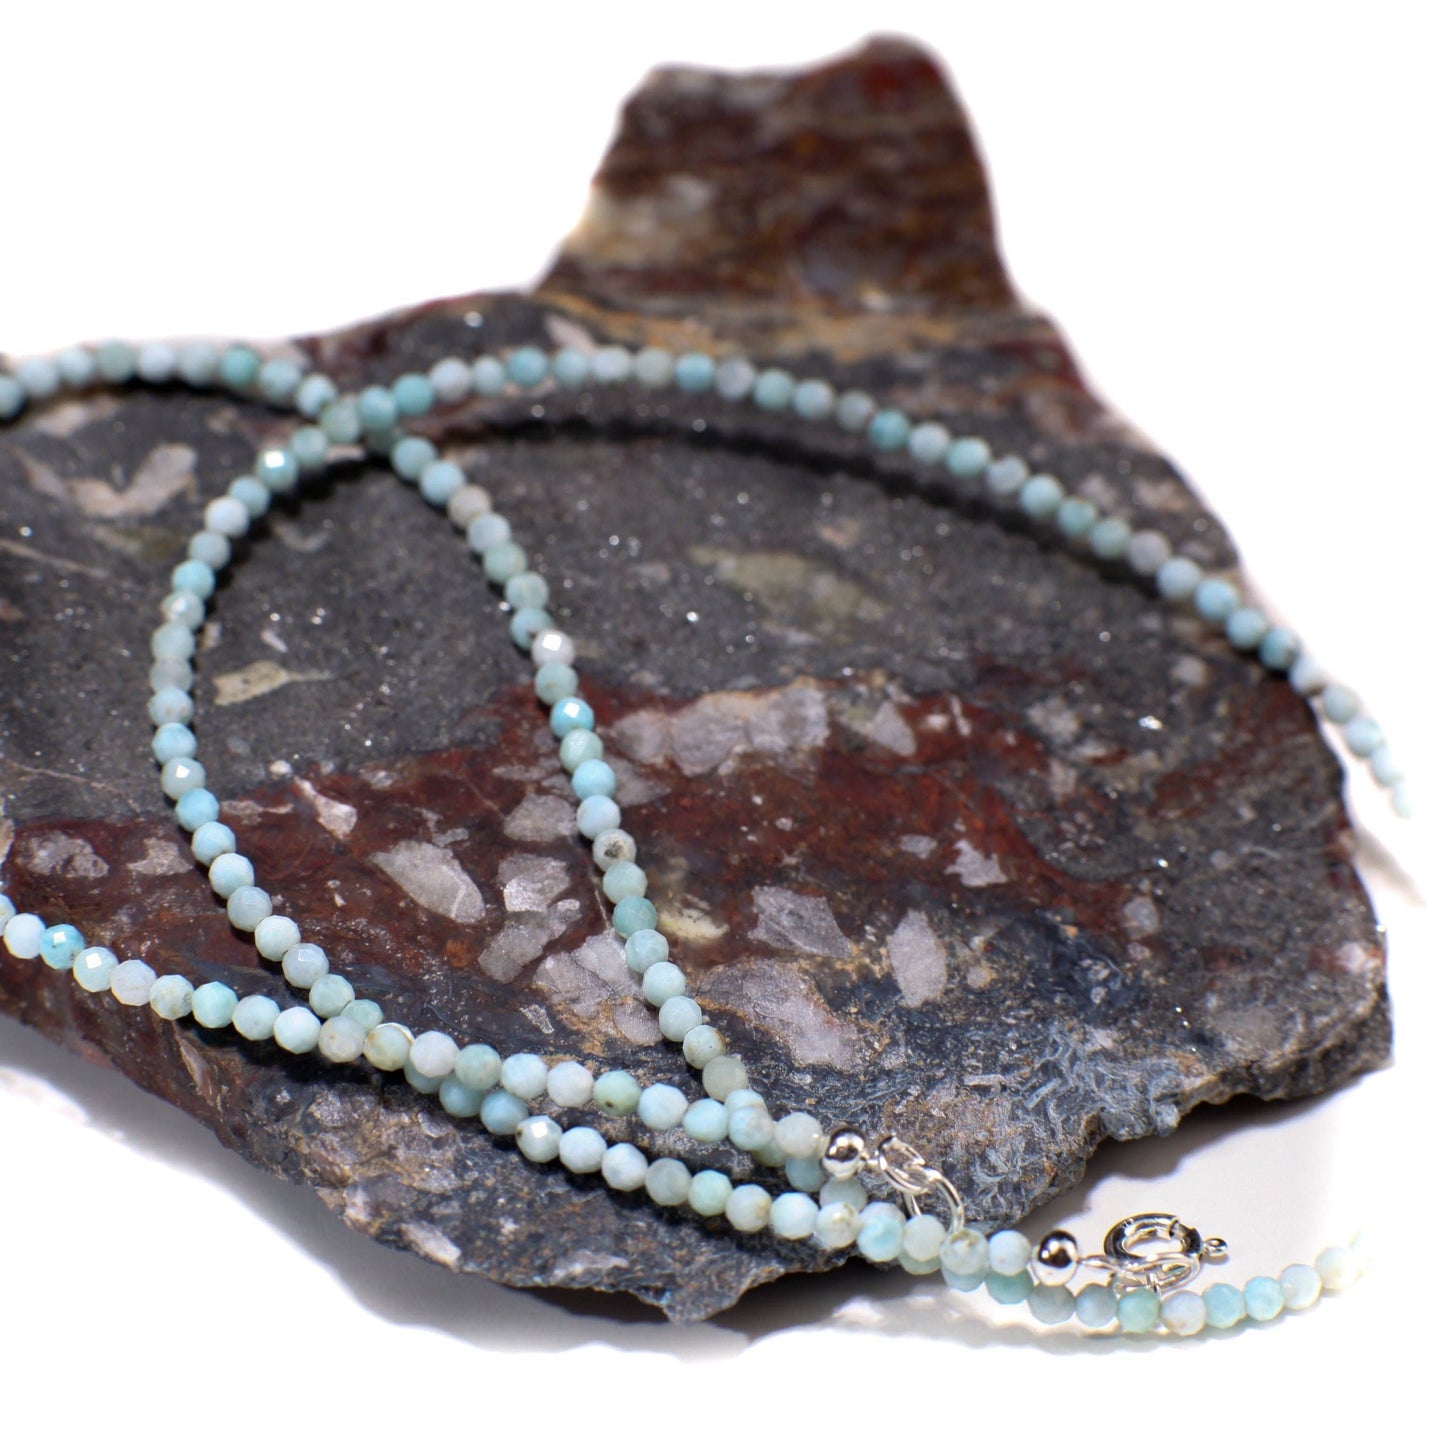 Natural Larimar Faceted 2.5mm Gemstone Choker, Layering Necklace in 925 Sterling Silver Chain and Clasp, Gift, Healing Gem